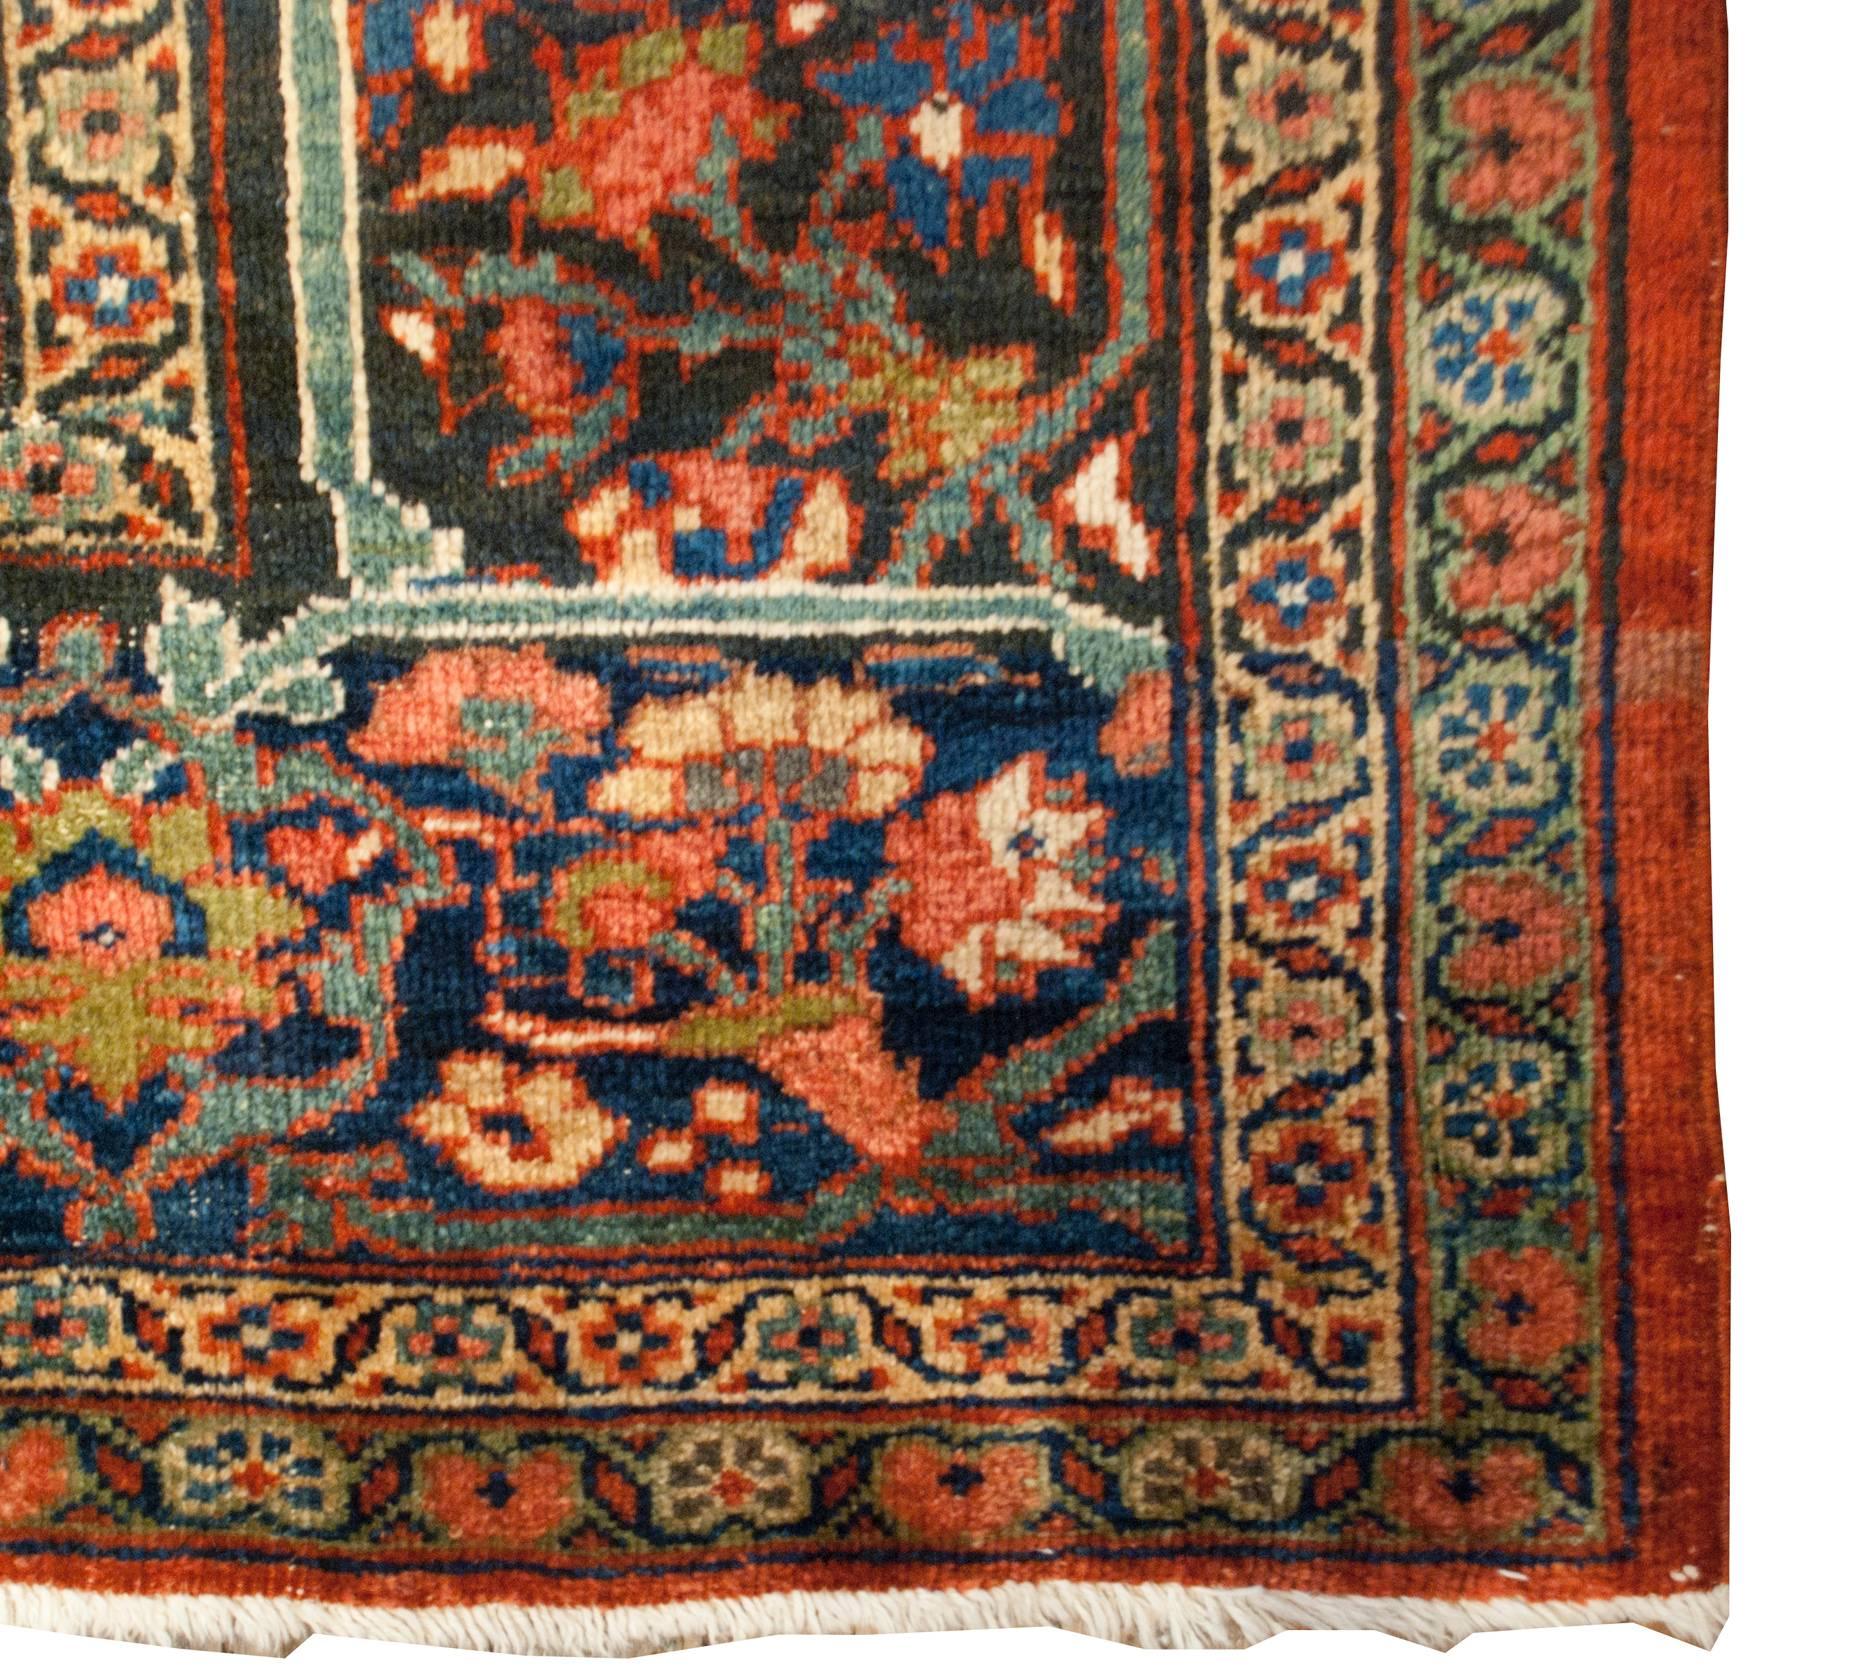 An extraordinary early 20th century Persian Mahal rug with an amazing all-over pattern of multicolored flowers in a wonderful lattice pattern on a crimson background. The wide border is composed with scrolling vines criss-crossing a garden of